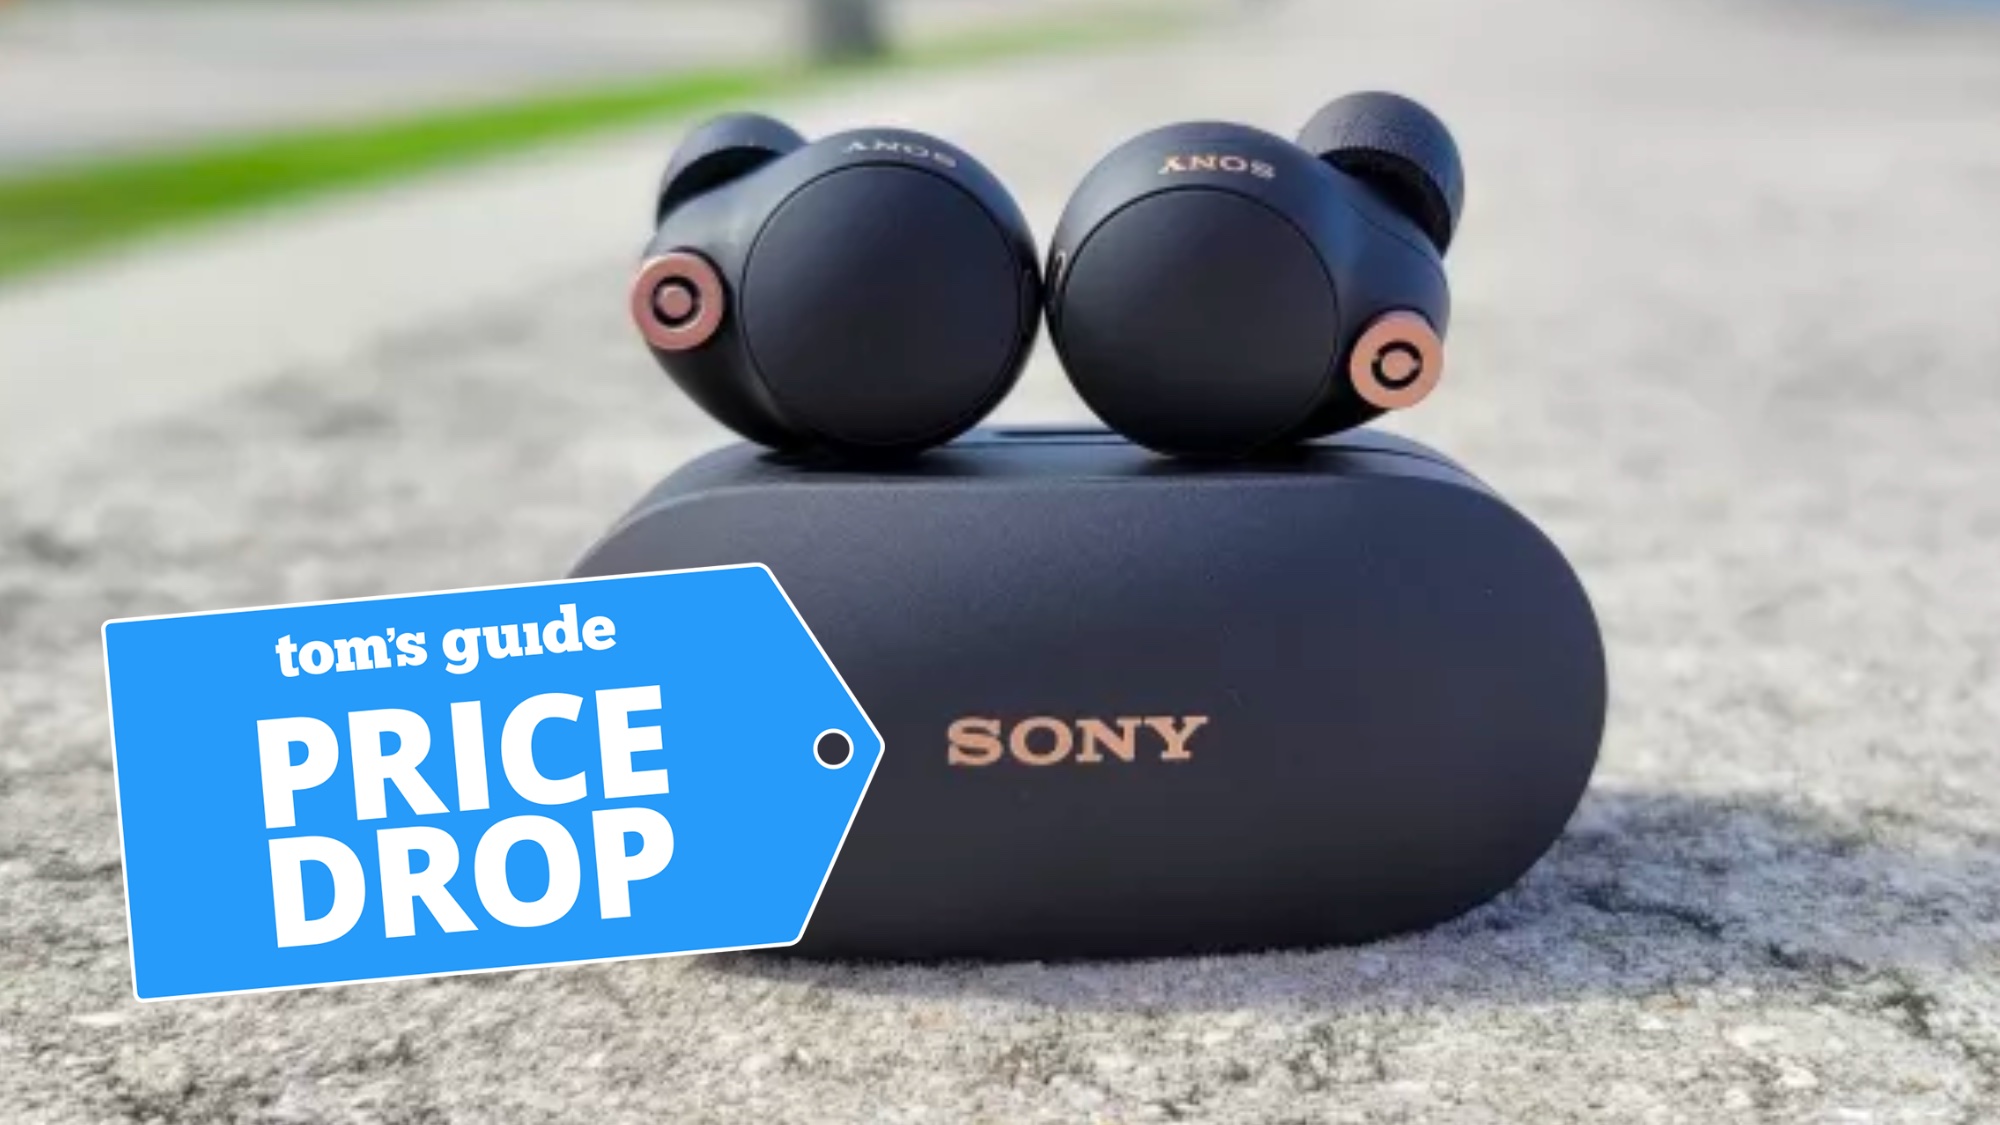 Sony WF-1000XM4 Review: The New Best Buds for Bigger Ears